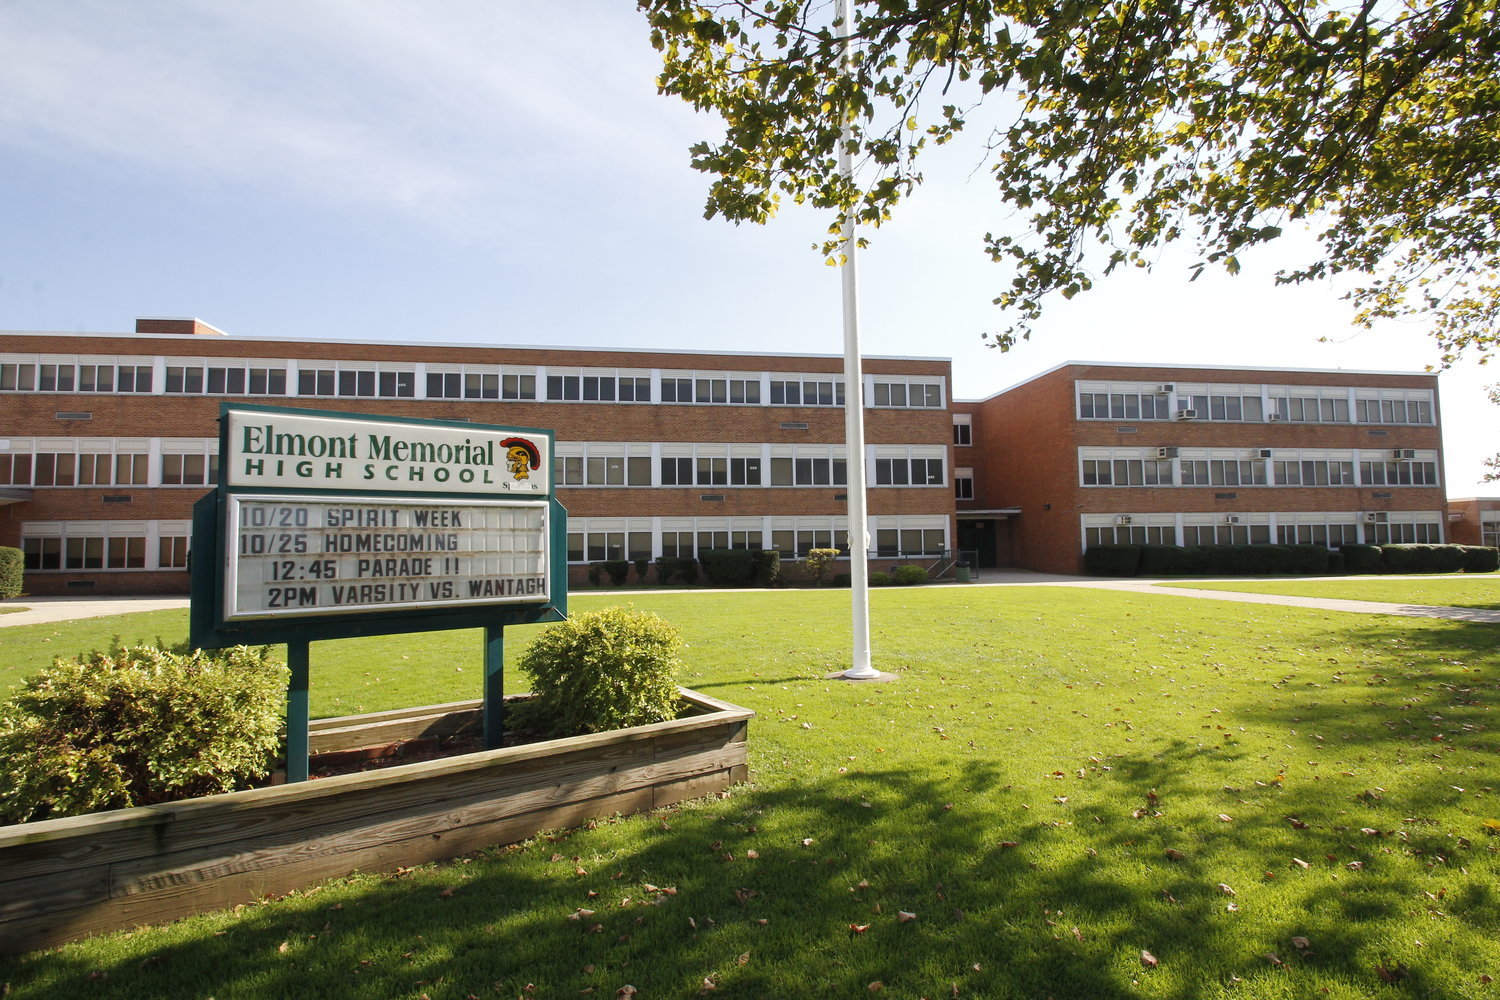 Tiffany Capers, former PTSA president at Elmont Memorial High School, said the December incident was the most recent example of obscene behavior targeted at Elmont students by Mepham spectators.